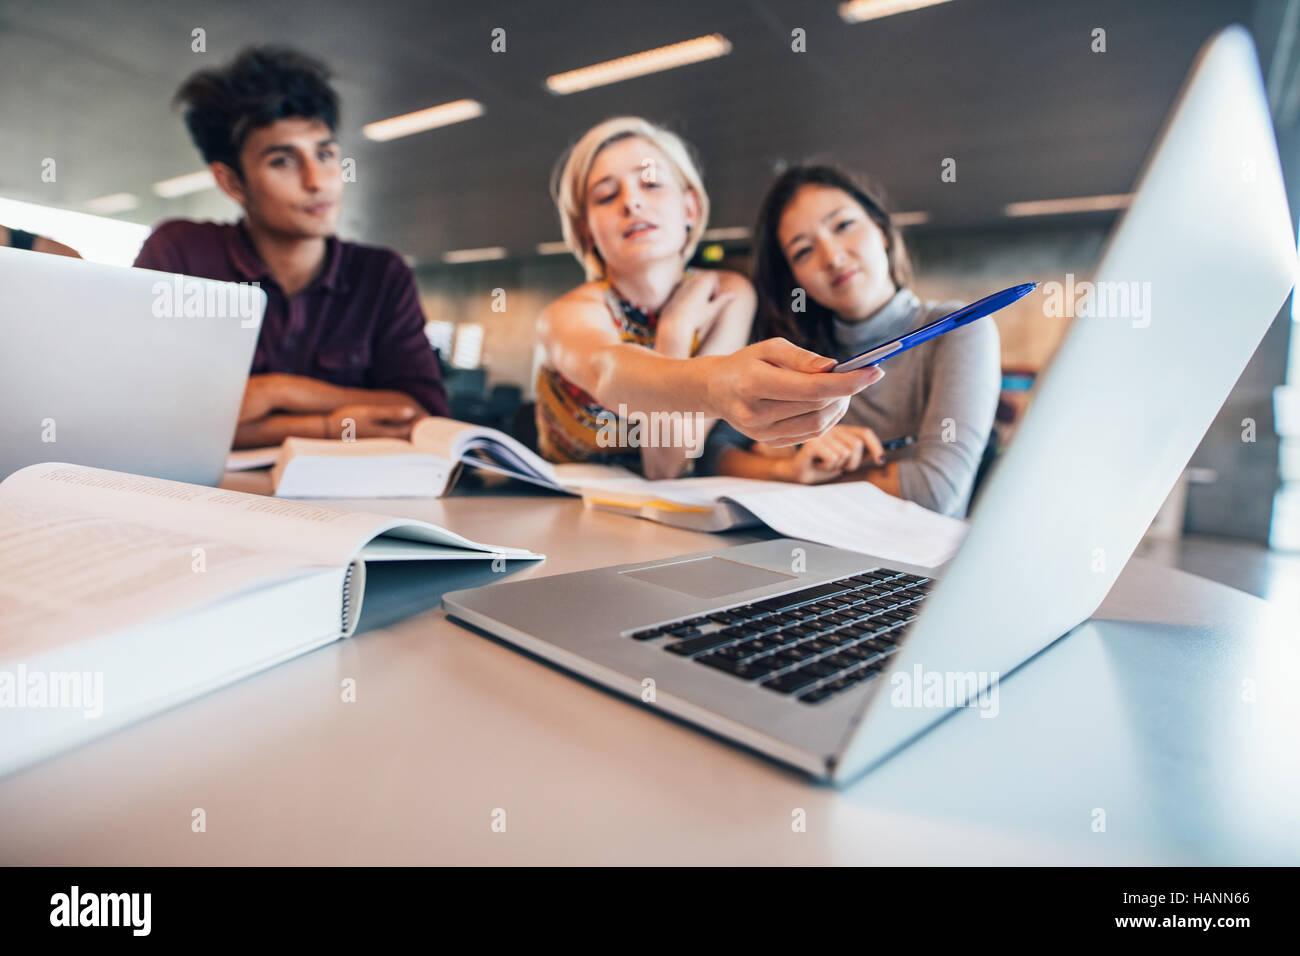 Multiracial young people doing group study at table with woman pointing at laptop. University students researching information for their project. Stock Photo